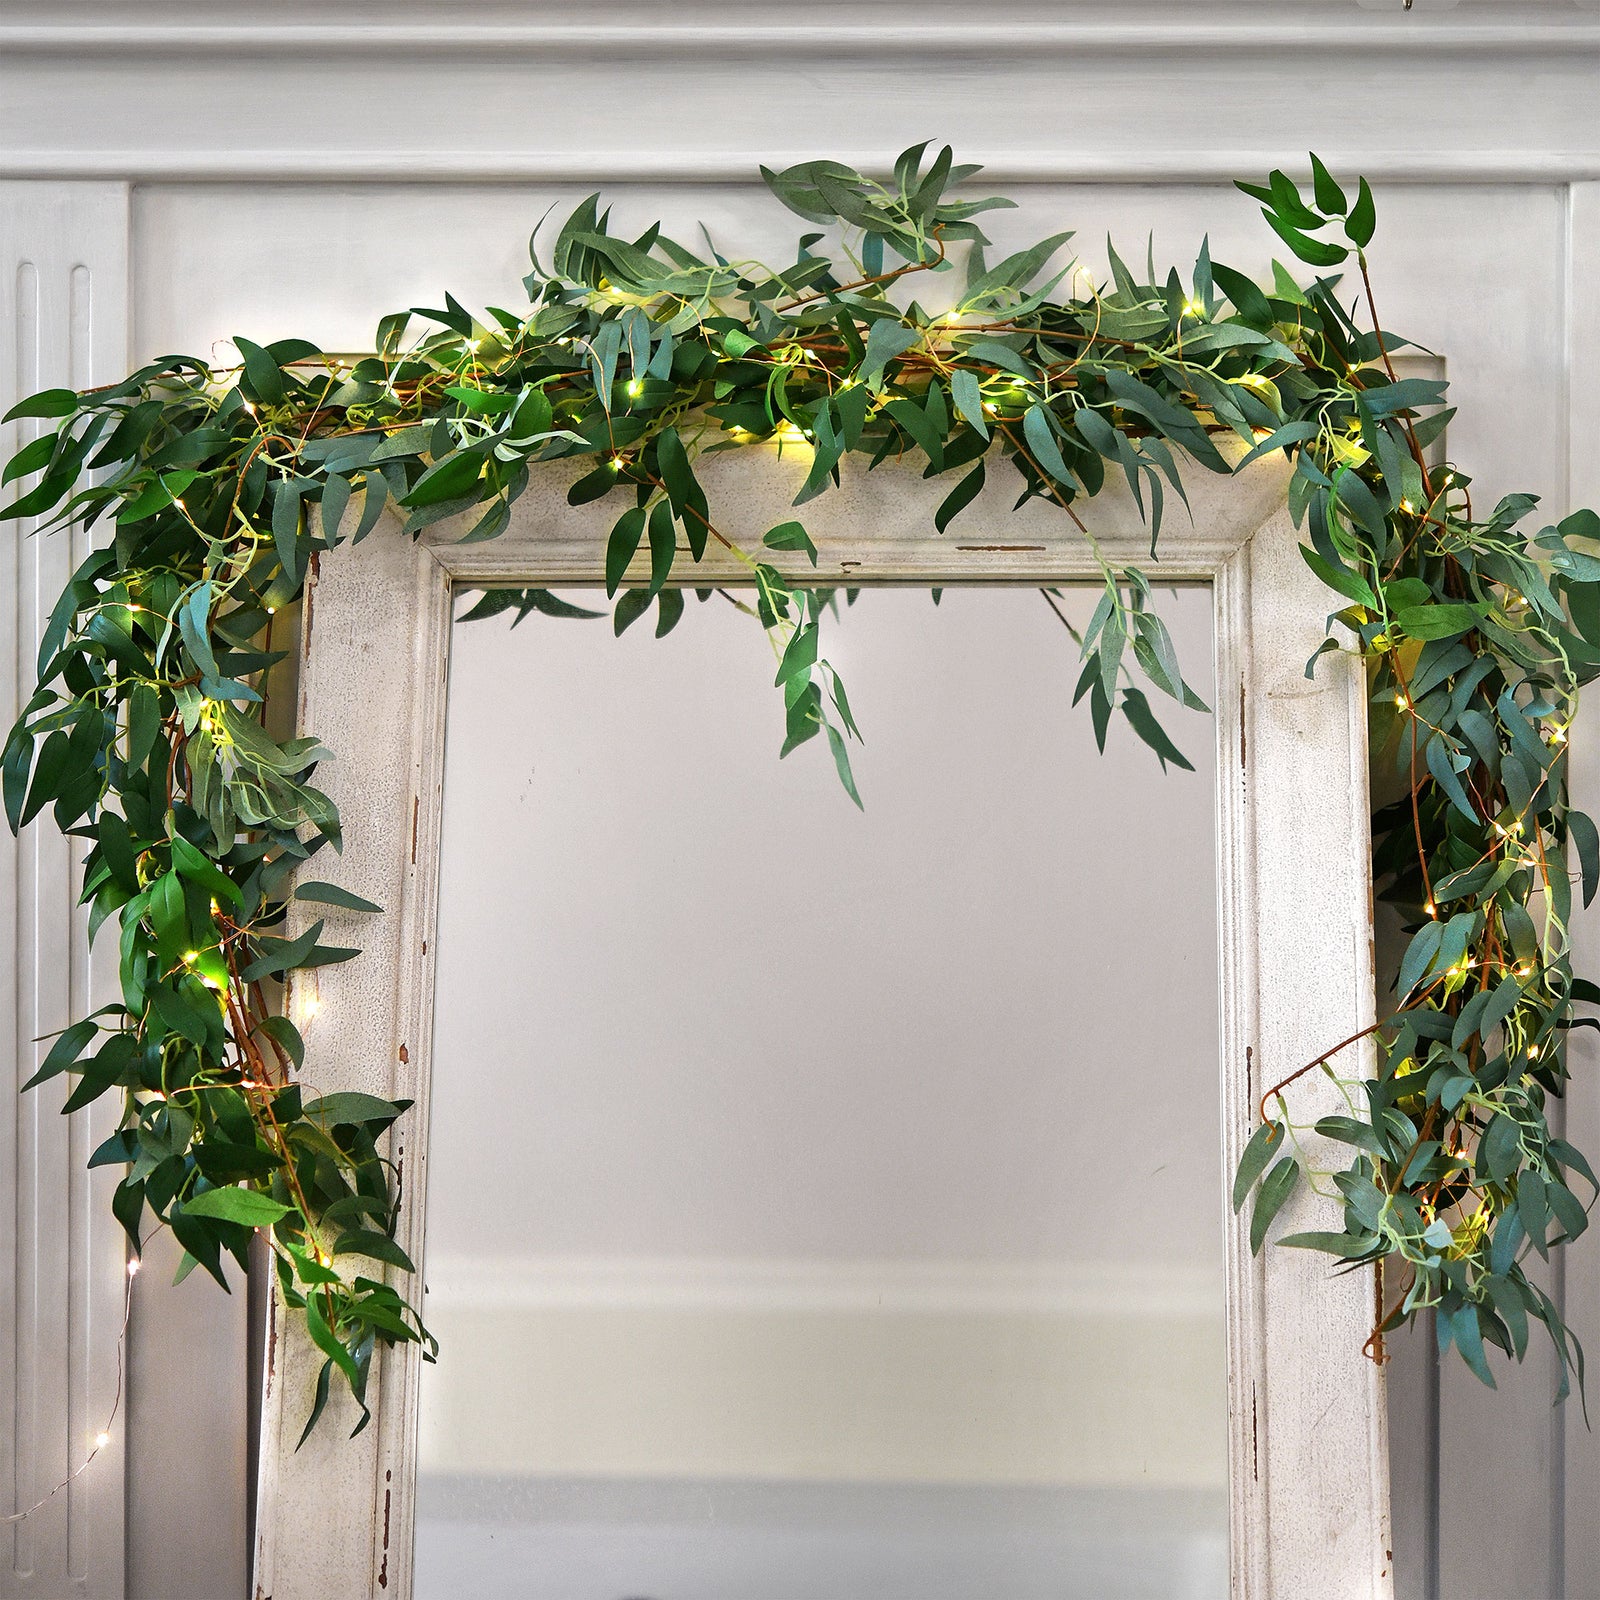 2 Mix Rustic Willow Garlands, Bendable Artificial Greenery Vine Leaves for Wedding Home Decoration with 33 Feet String Lights